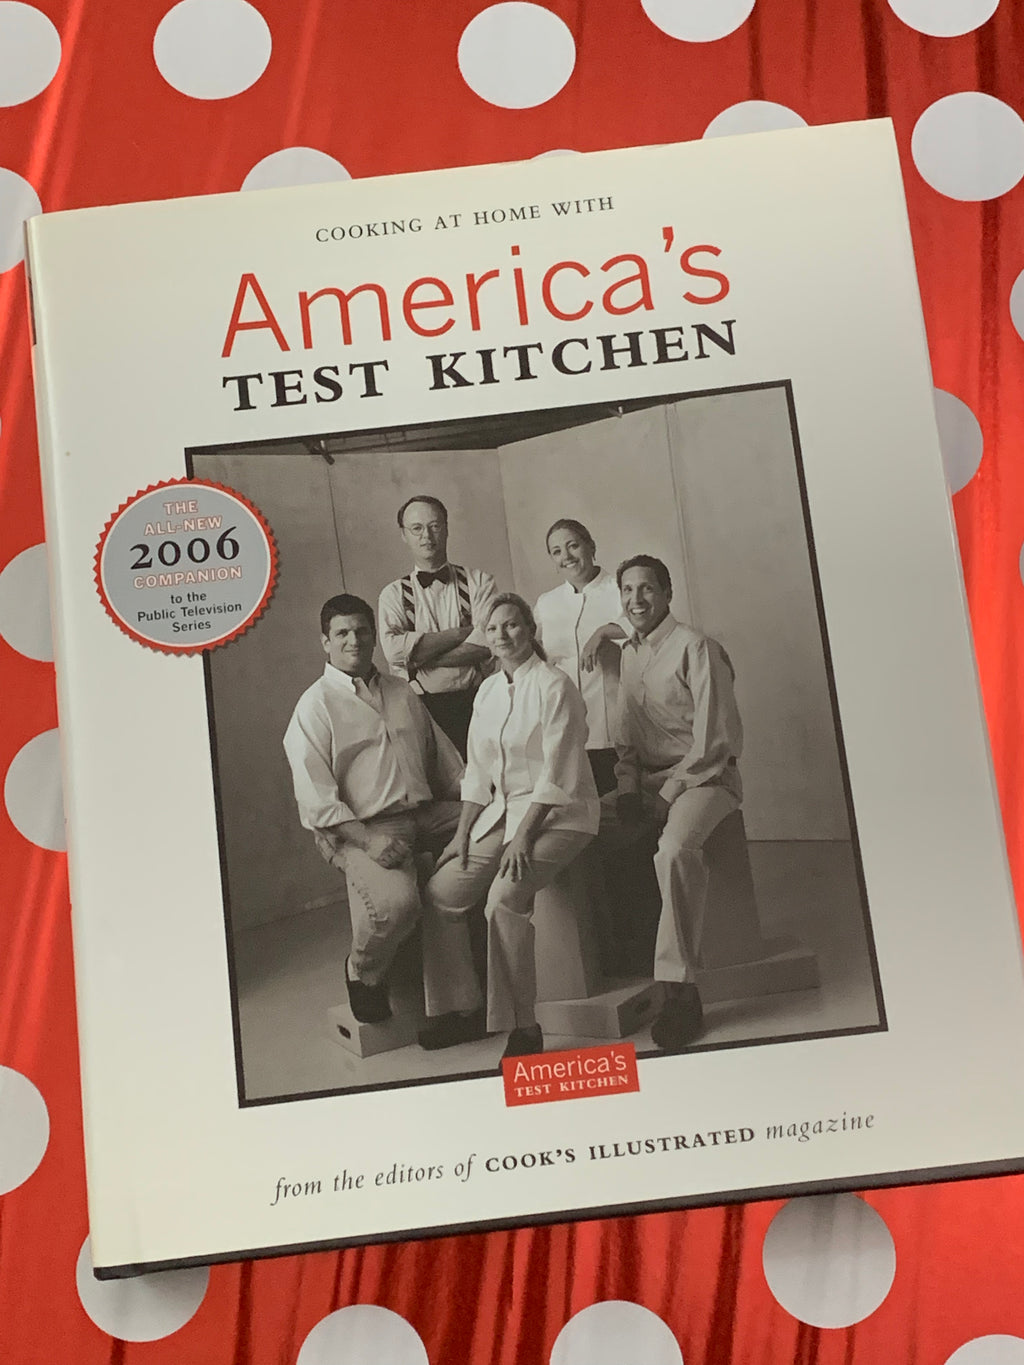 Cooking at Home with America's Test Kitchen- By the Editors of Cook's Illustrated Magazine